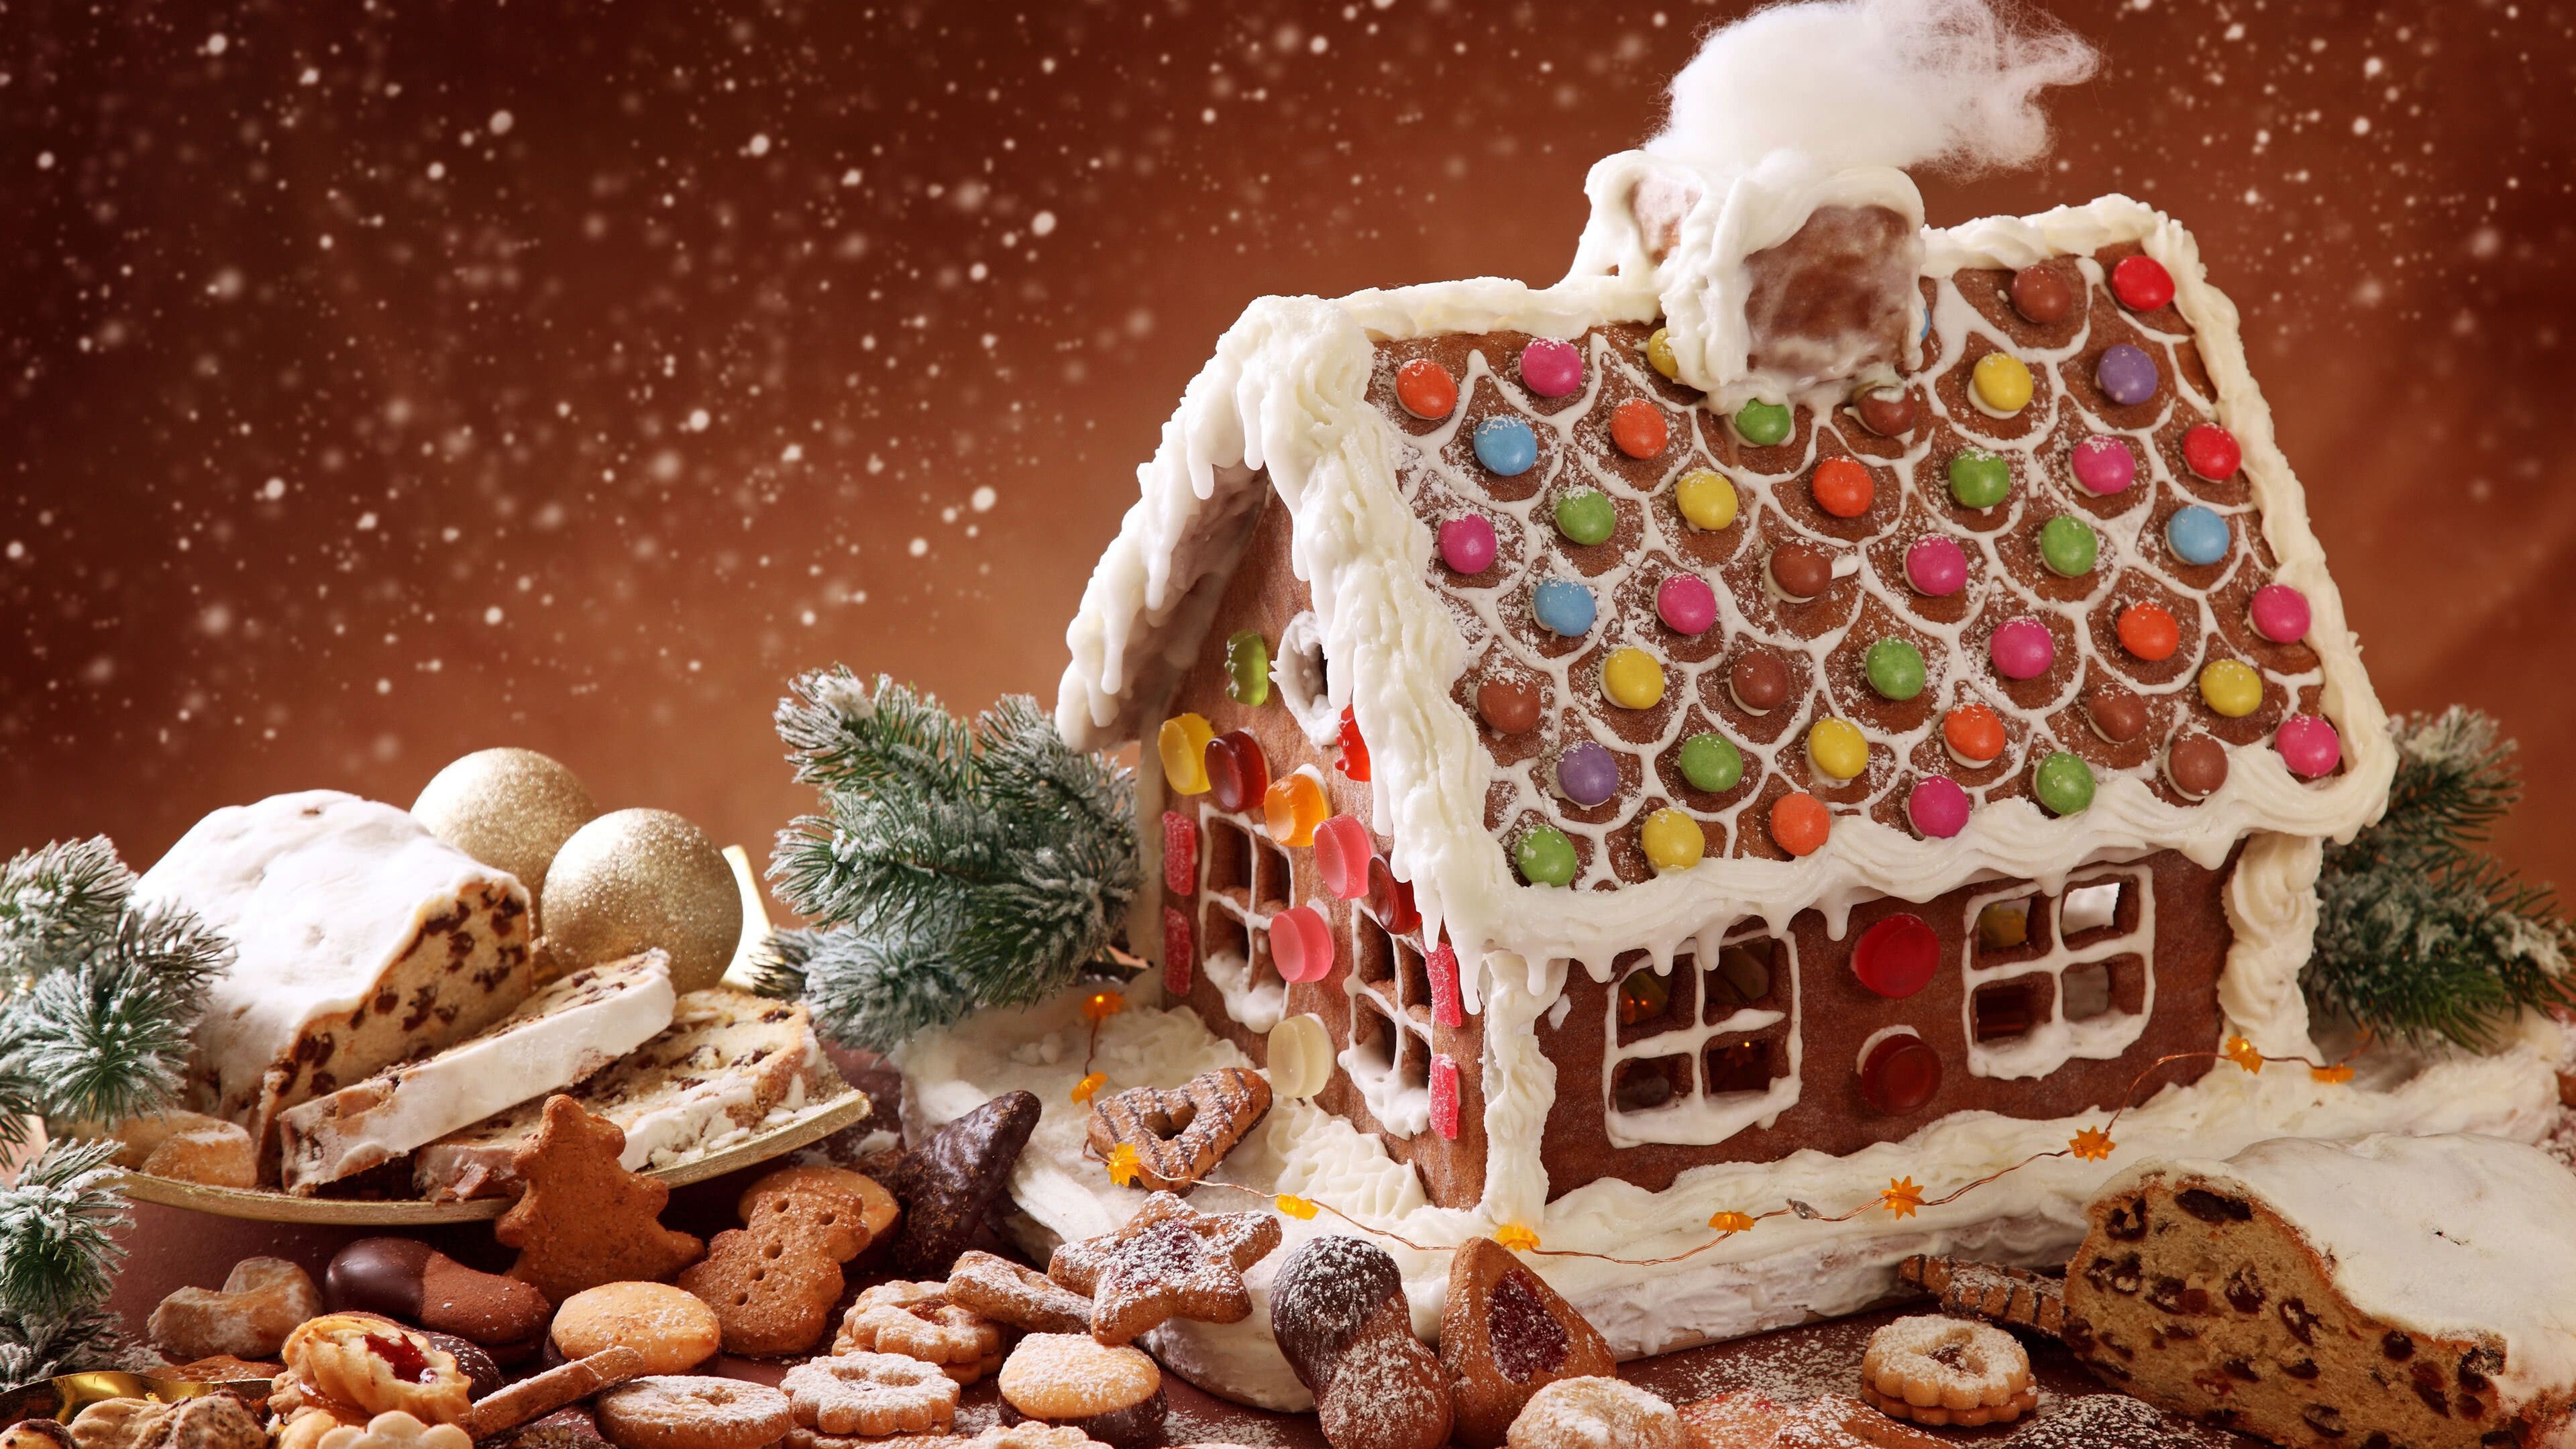 Traditional holiday treat, Sweet and spicy aroma, Festive wallpapers, Whimsical decorations, 3840x2160 4K Desktop